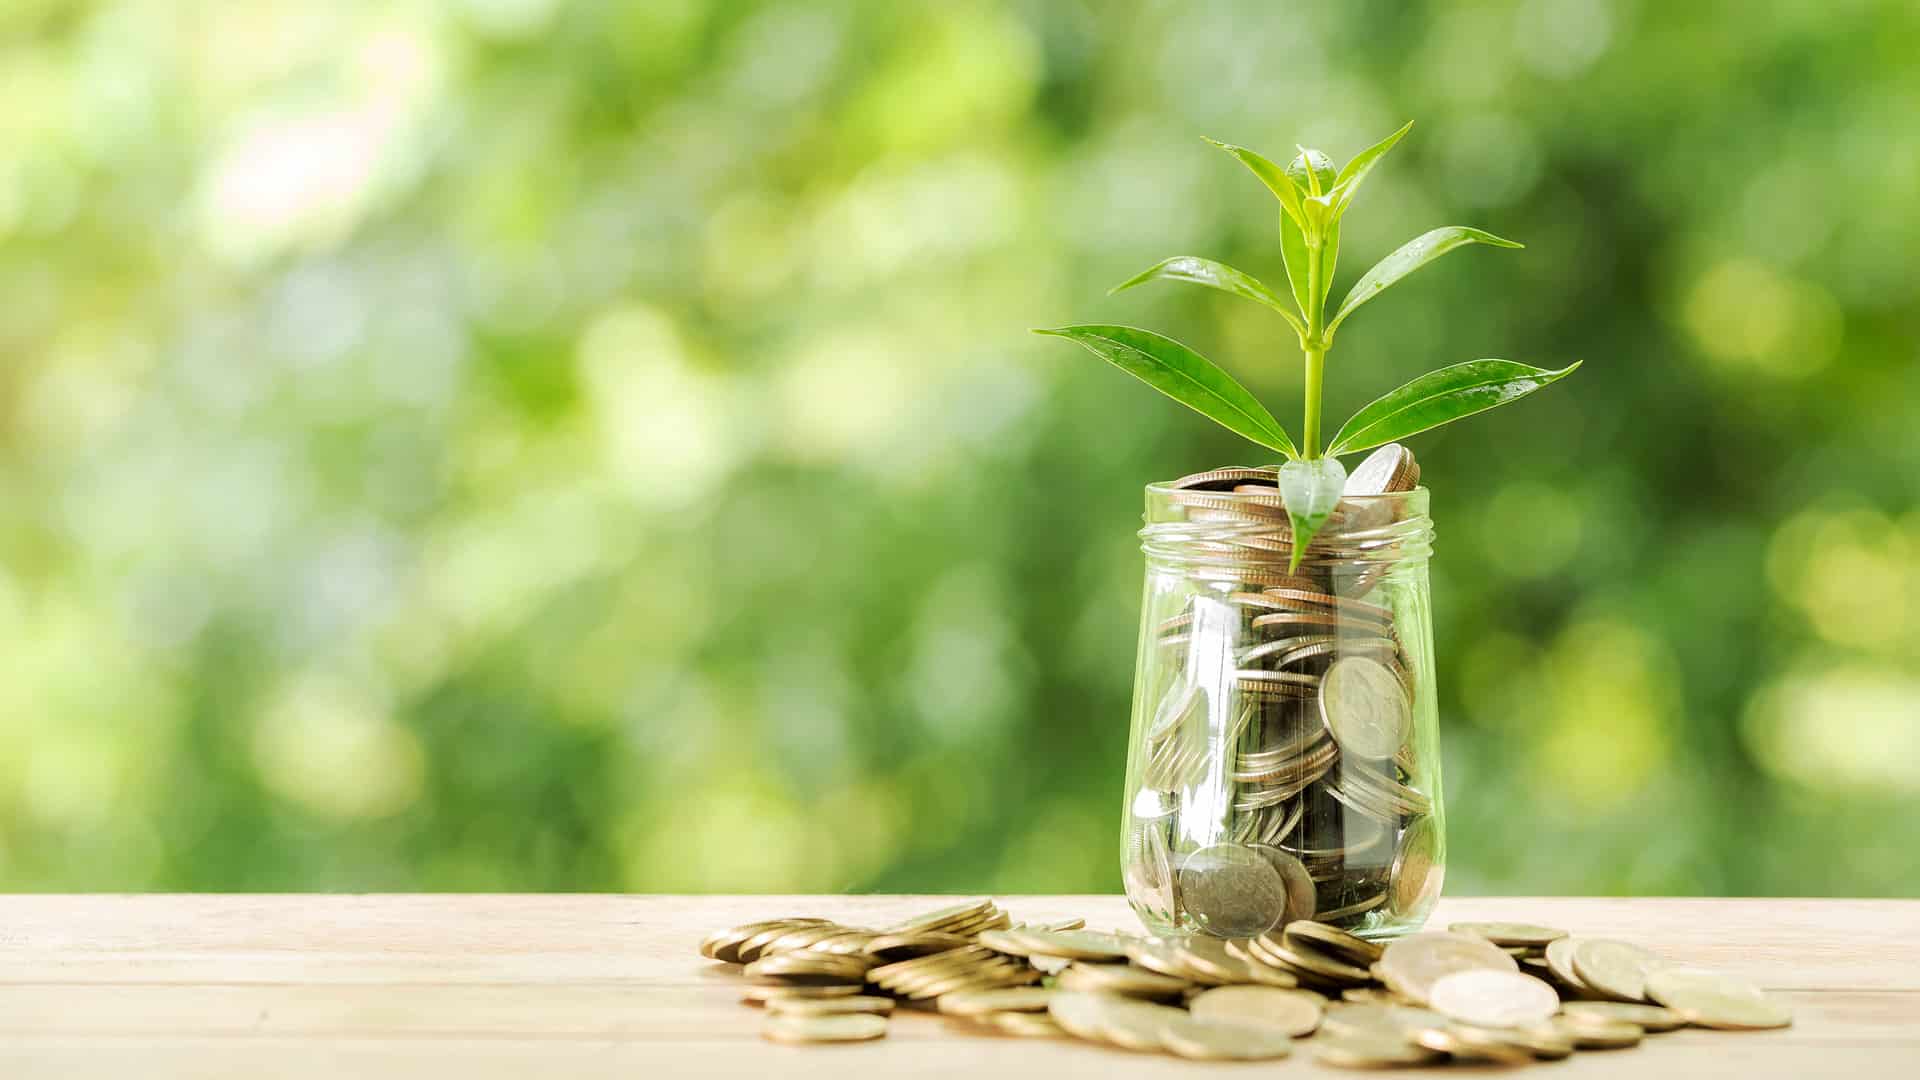 Agritech startup Sorted raises over USD 5 mn as seed funding